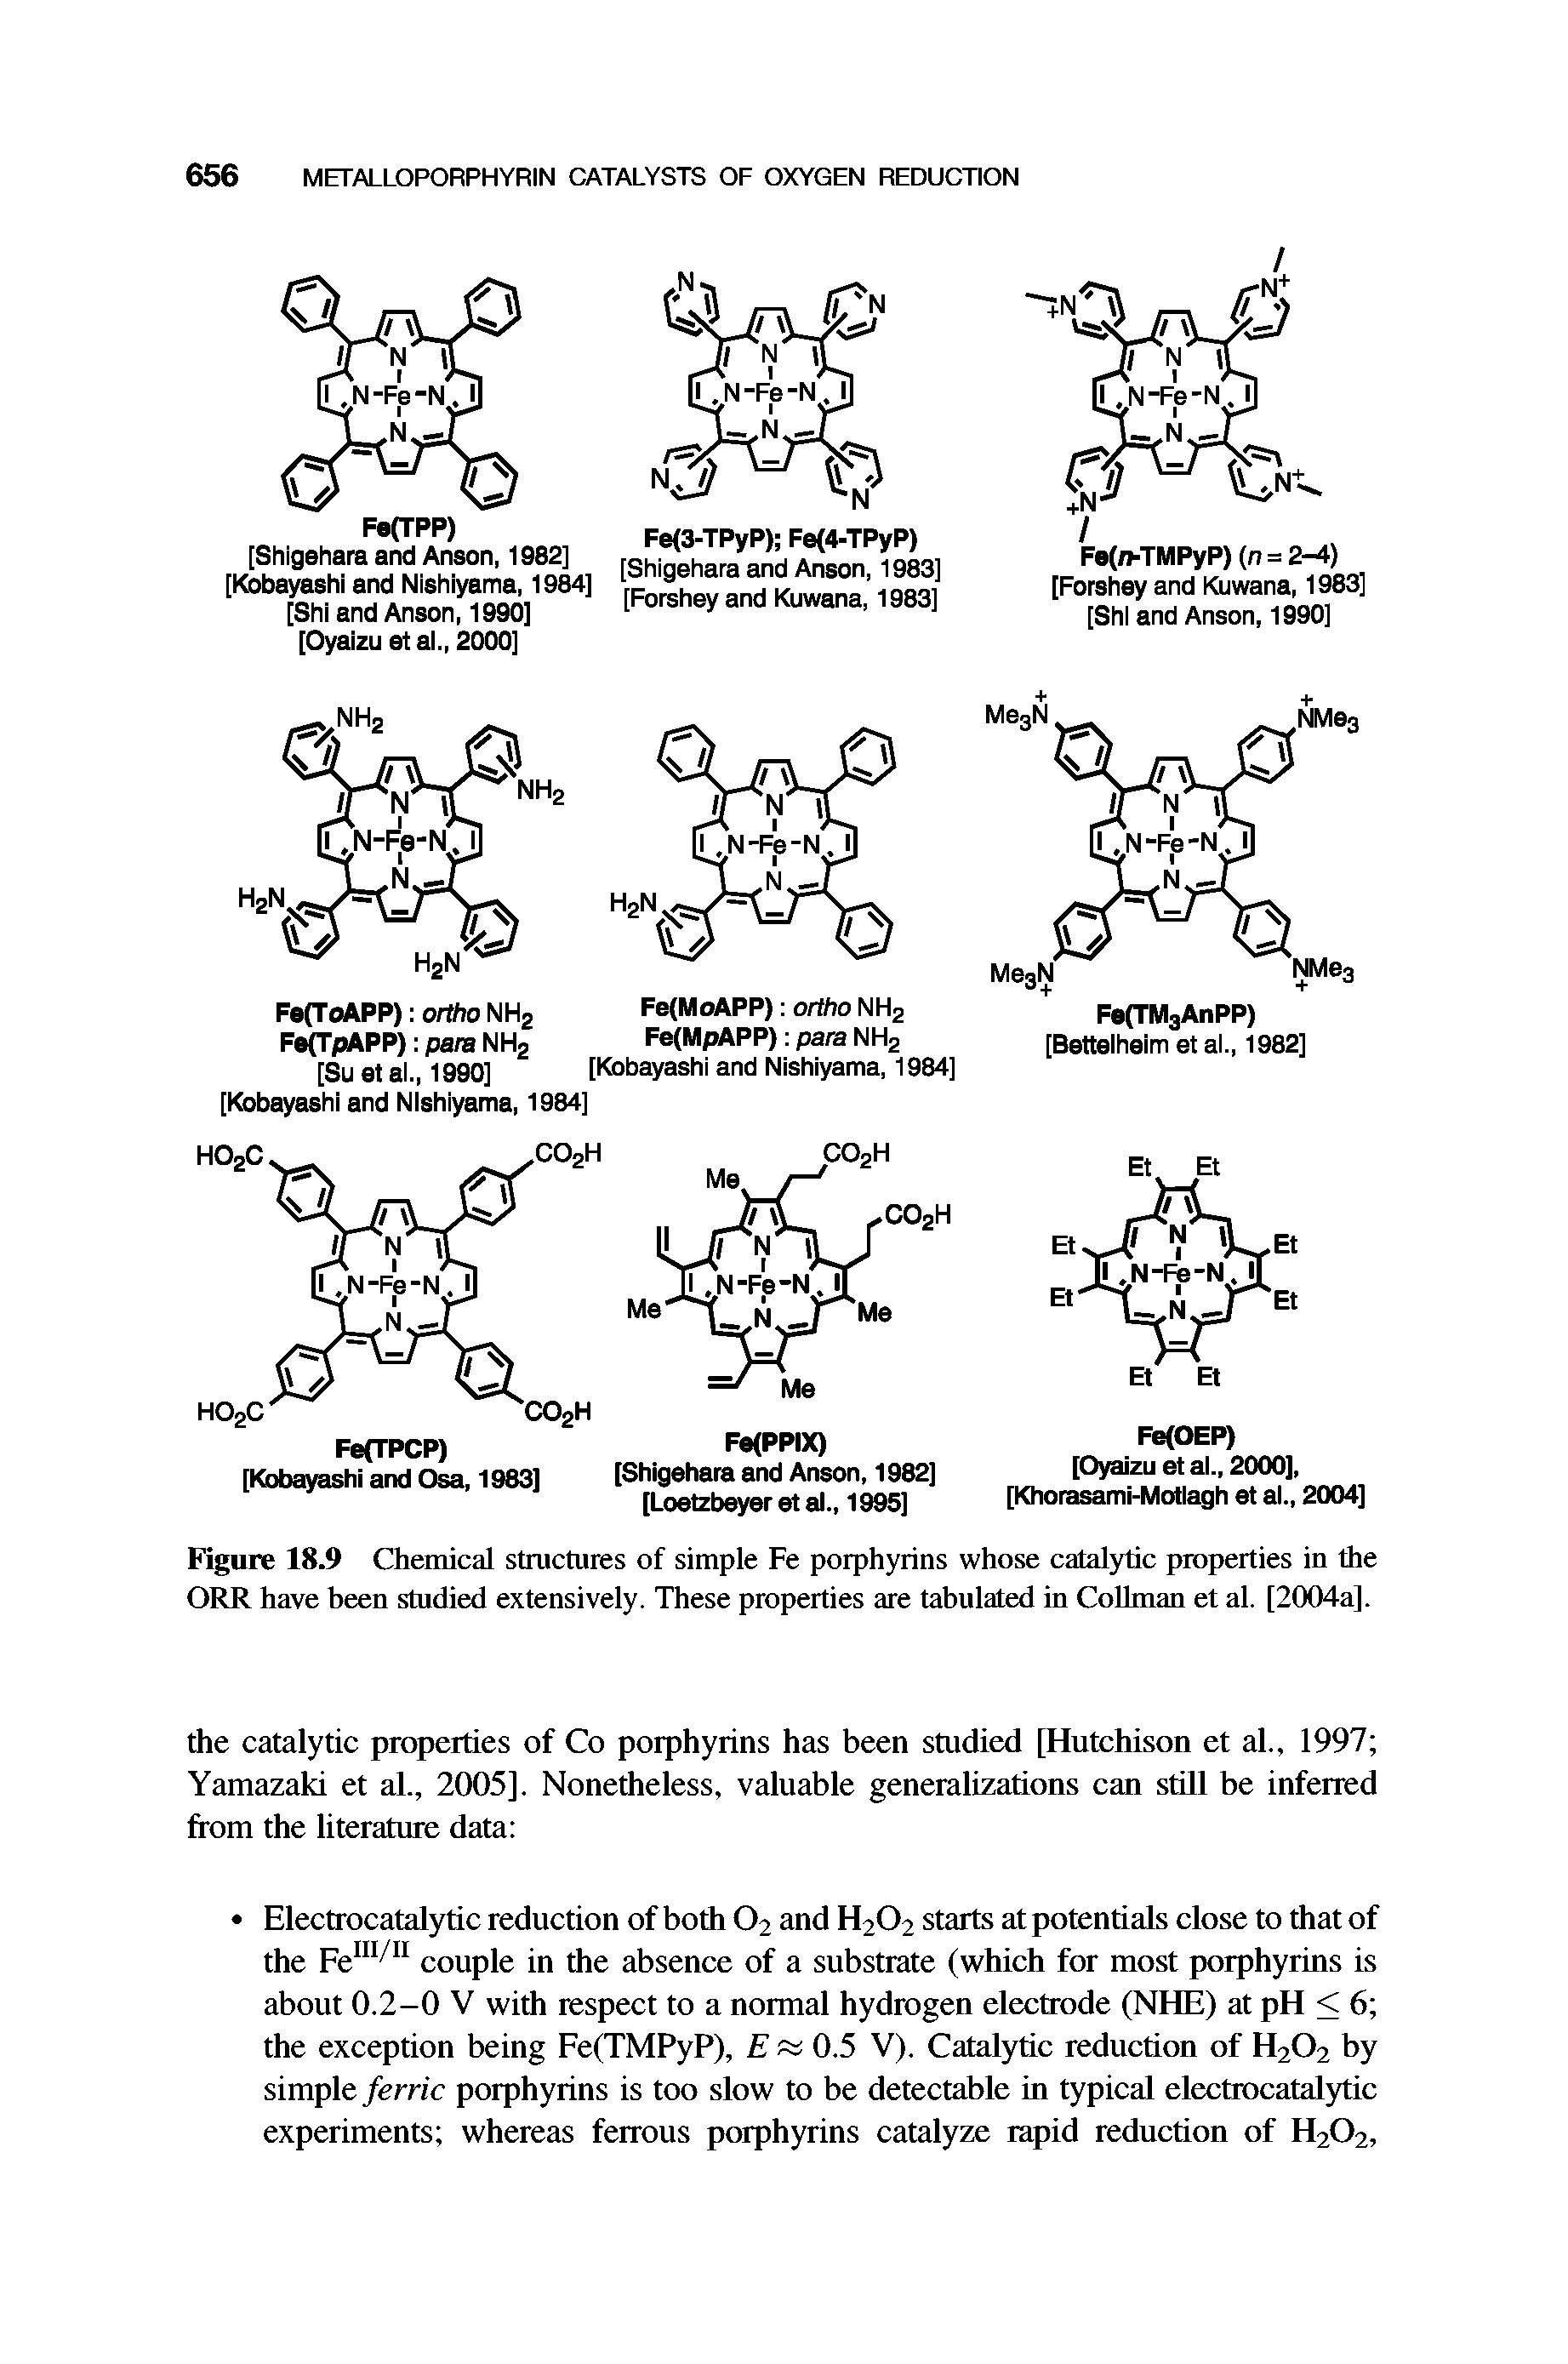 Figure 18.9 Chemical structures of simple Fe porphyrins whose catal3ftic properties in the ORR have heen studied extensively. These properties are tabulated in CoUman et al. [2004a].